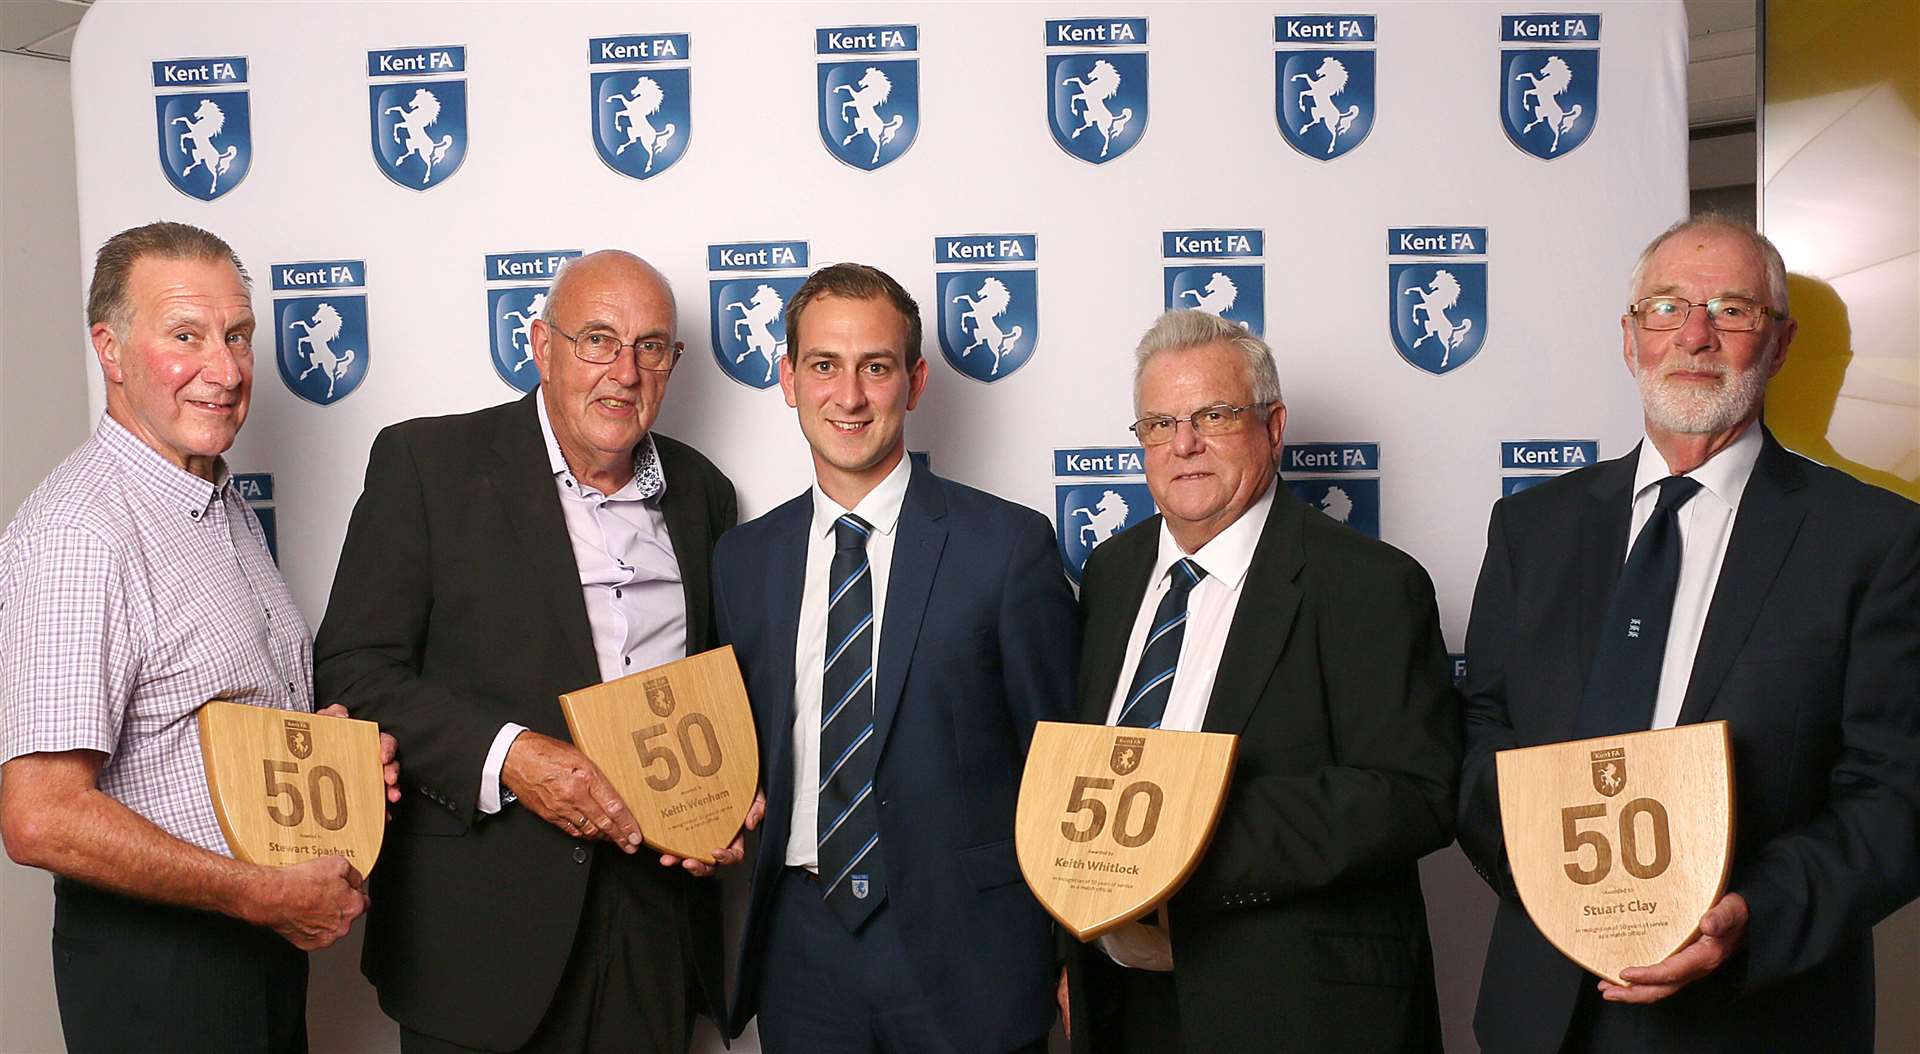 The Kent FA handed out 50-year service awards for officiating